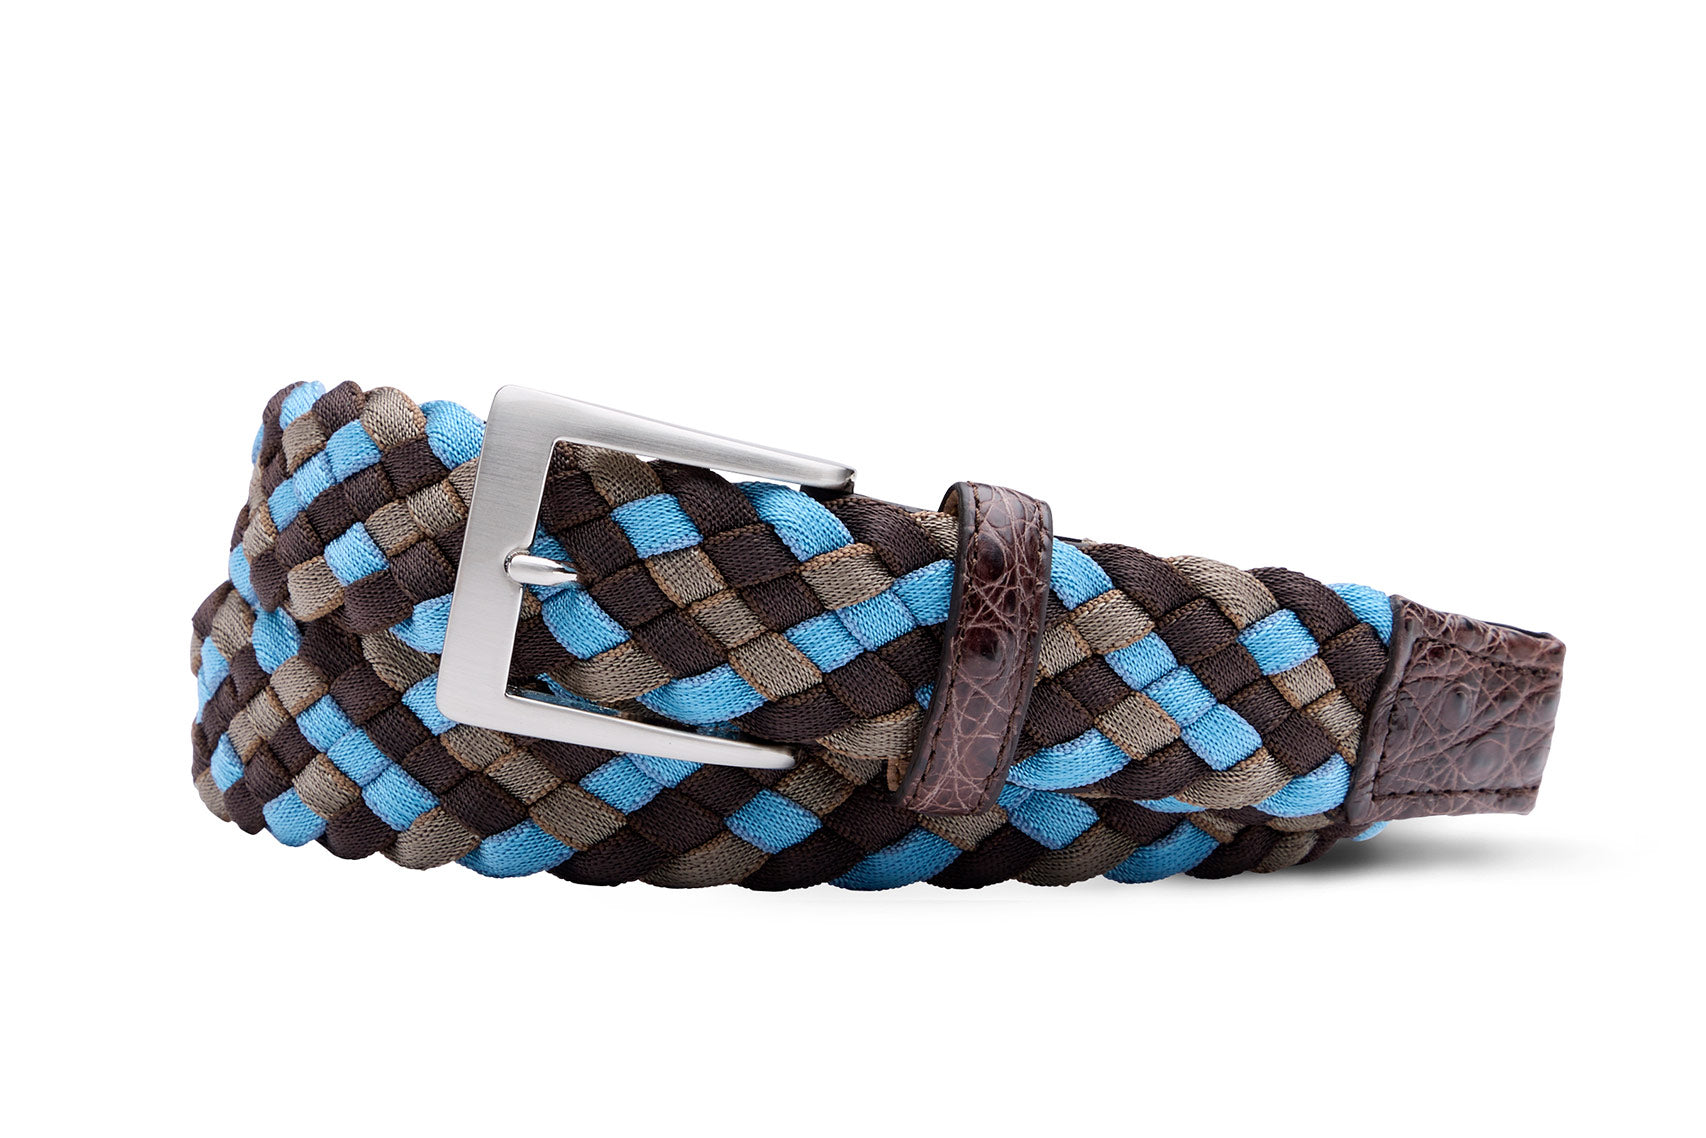 Chocolate/Sky Blue Stretch Cord Belt with Croc Tabs and Brushed Nickel Buckle